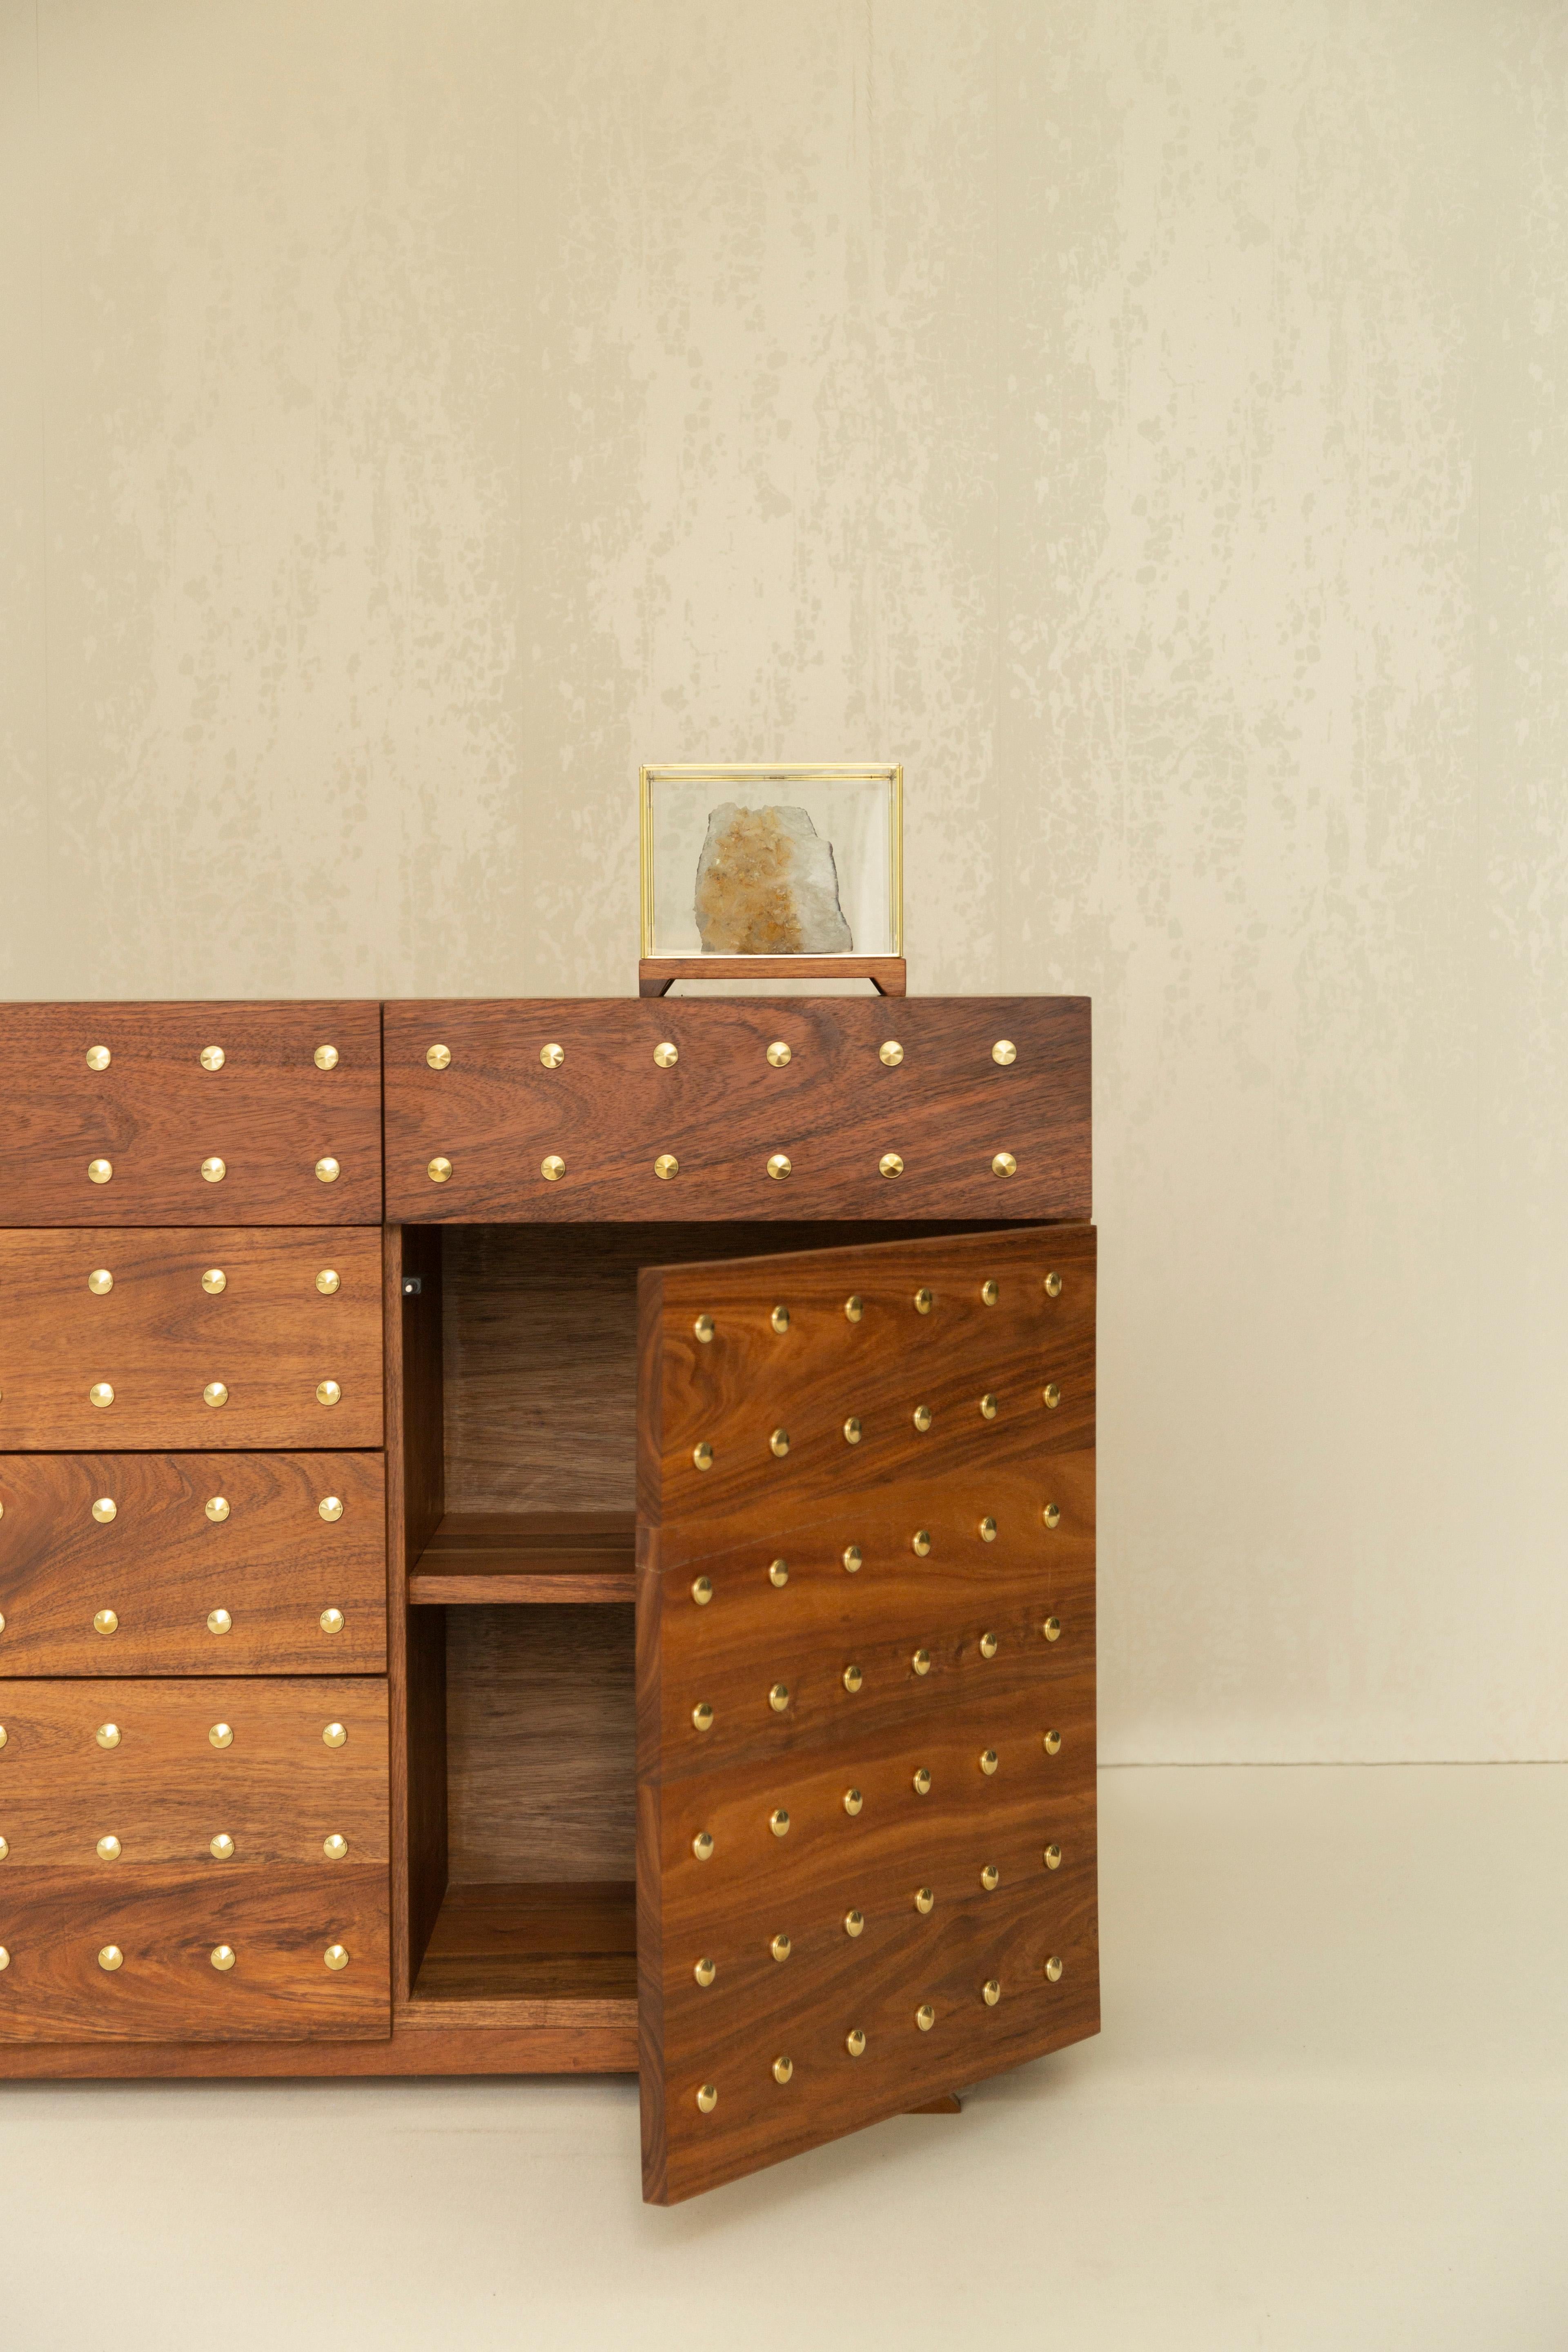 This exceptional piece, crafted from solid tzalam wood (caribbean walnut), boasts not only the inherent beauty of the wood but also features a touch of opulence with brass buttons inlaid delicately into the front of its drawers and door. 

With five